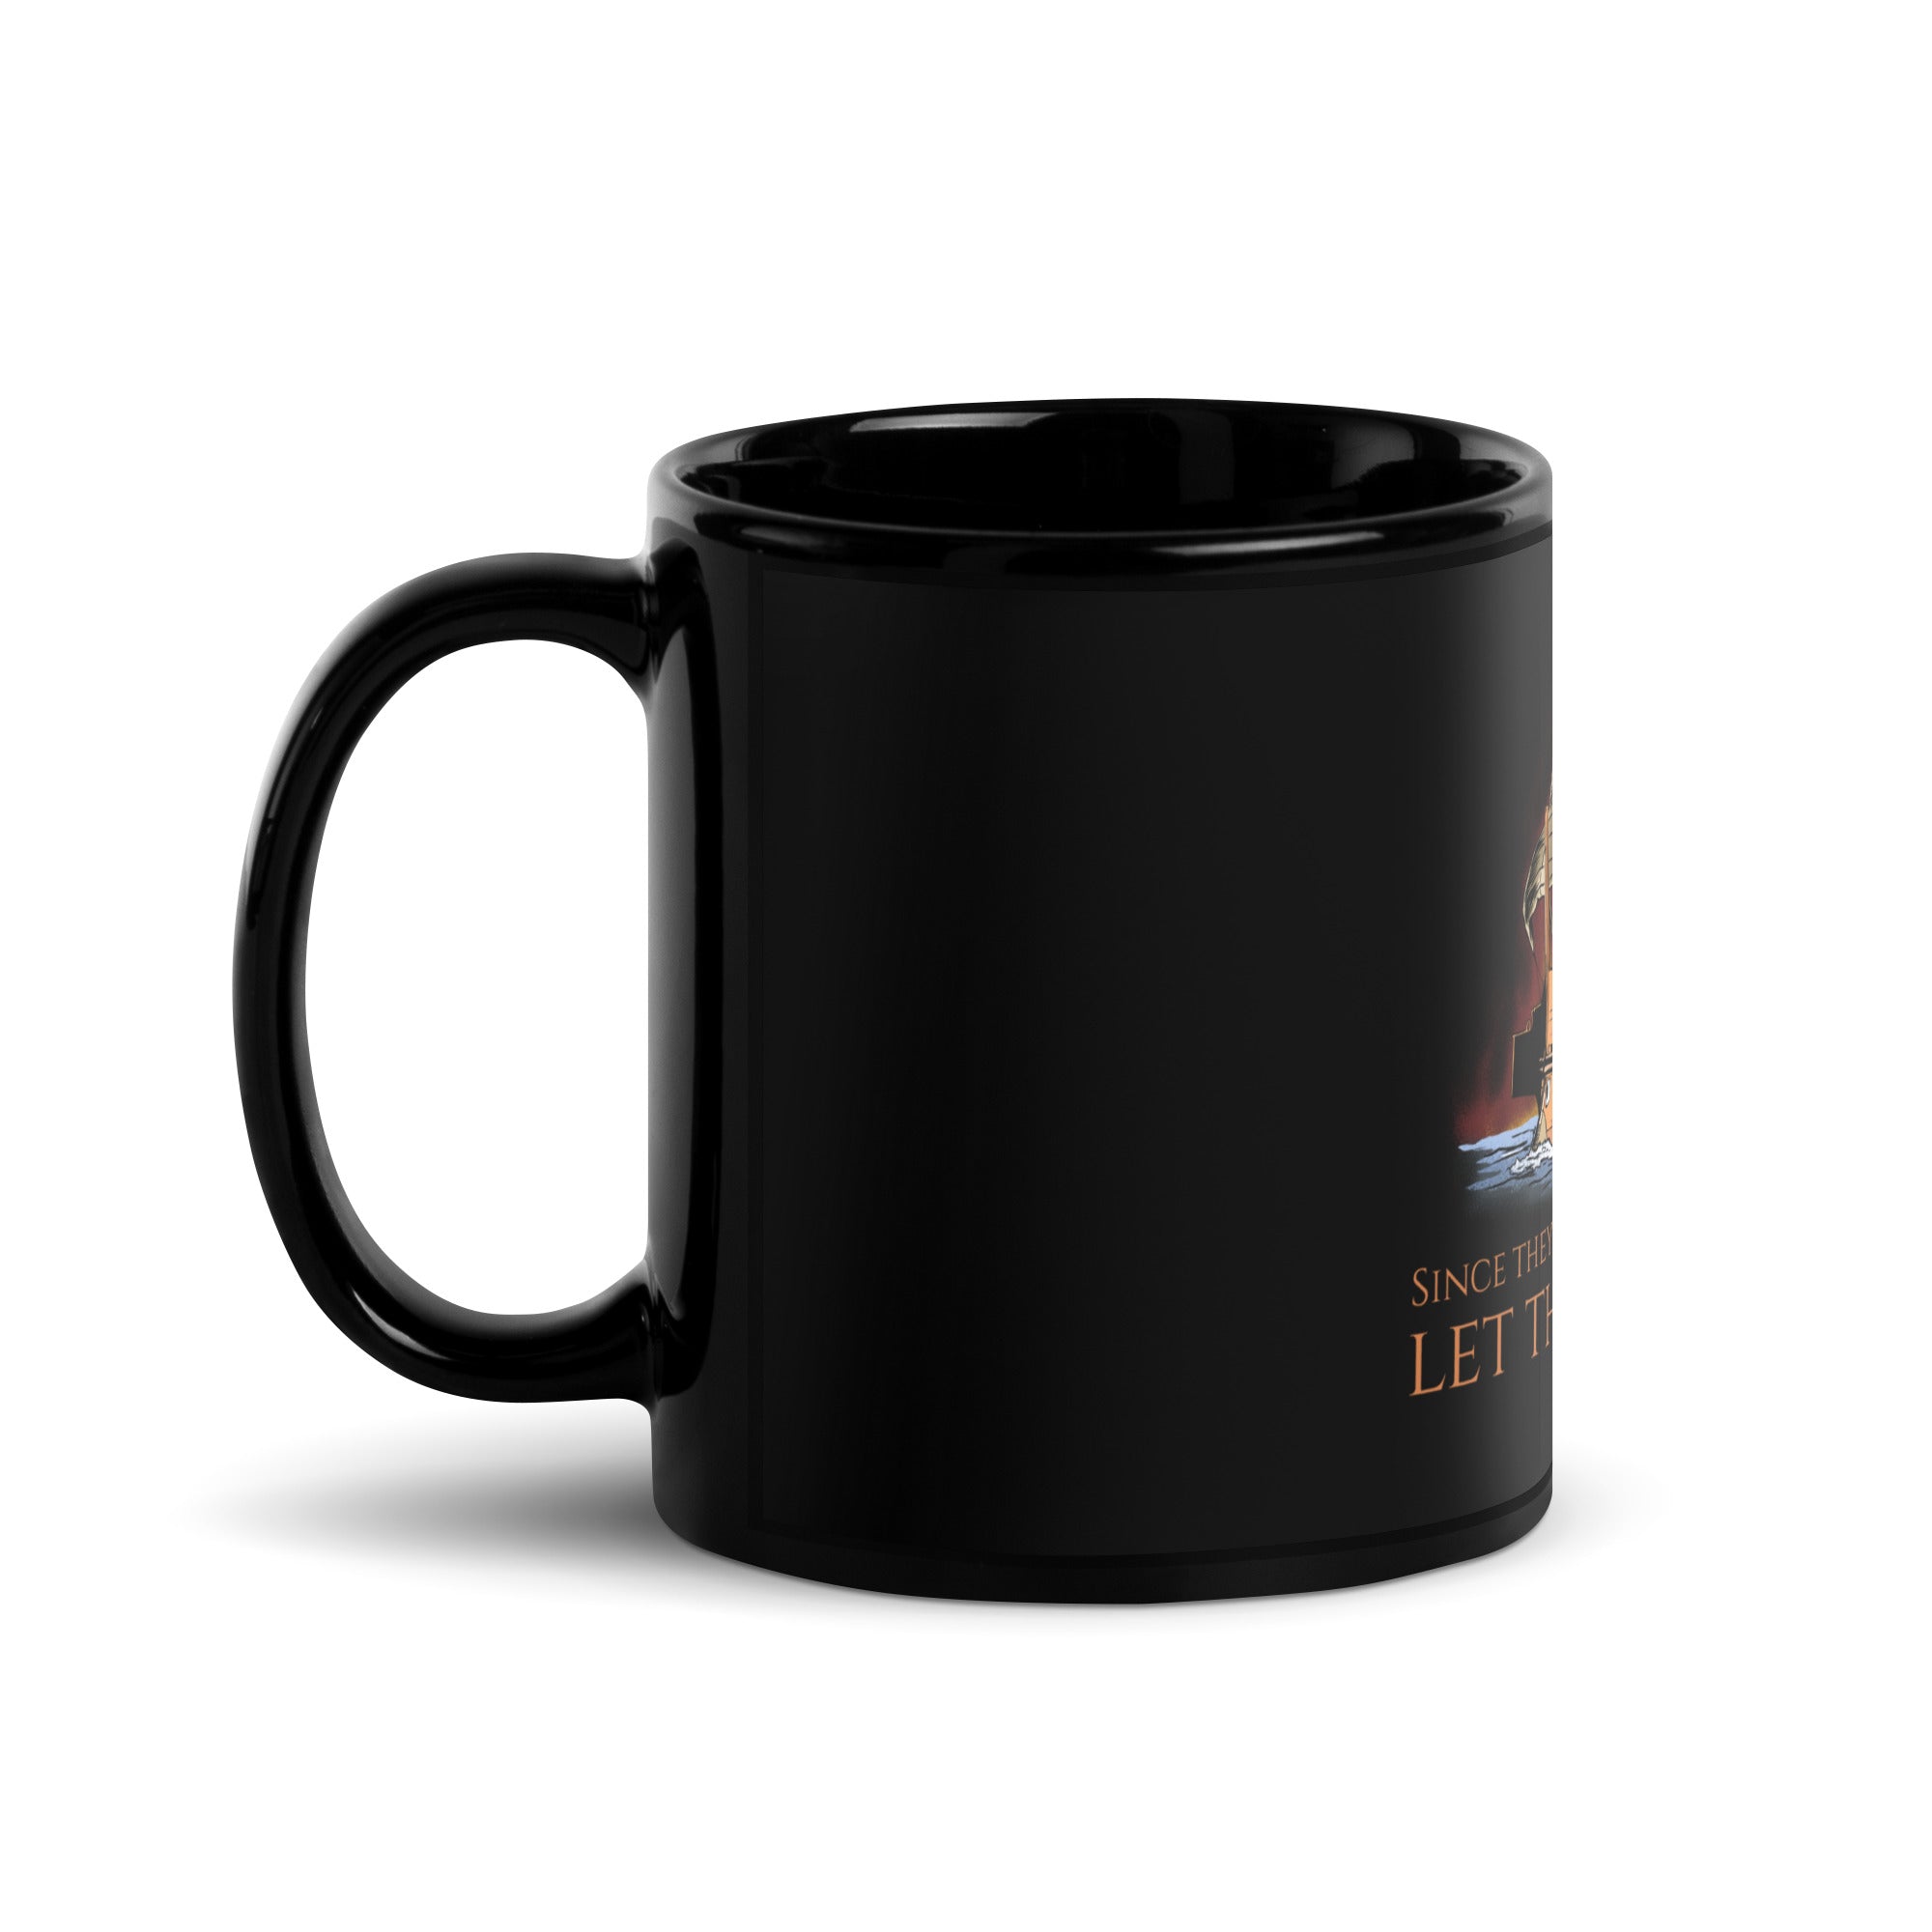 Since They Do Not Wish To Eat, Let Them Drink! - Battle Of Drepana - First Punic War - Ancient Rome Black Glossy Mug